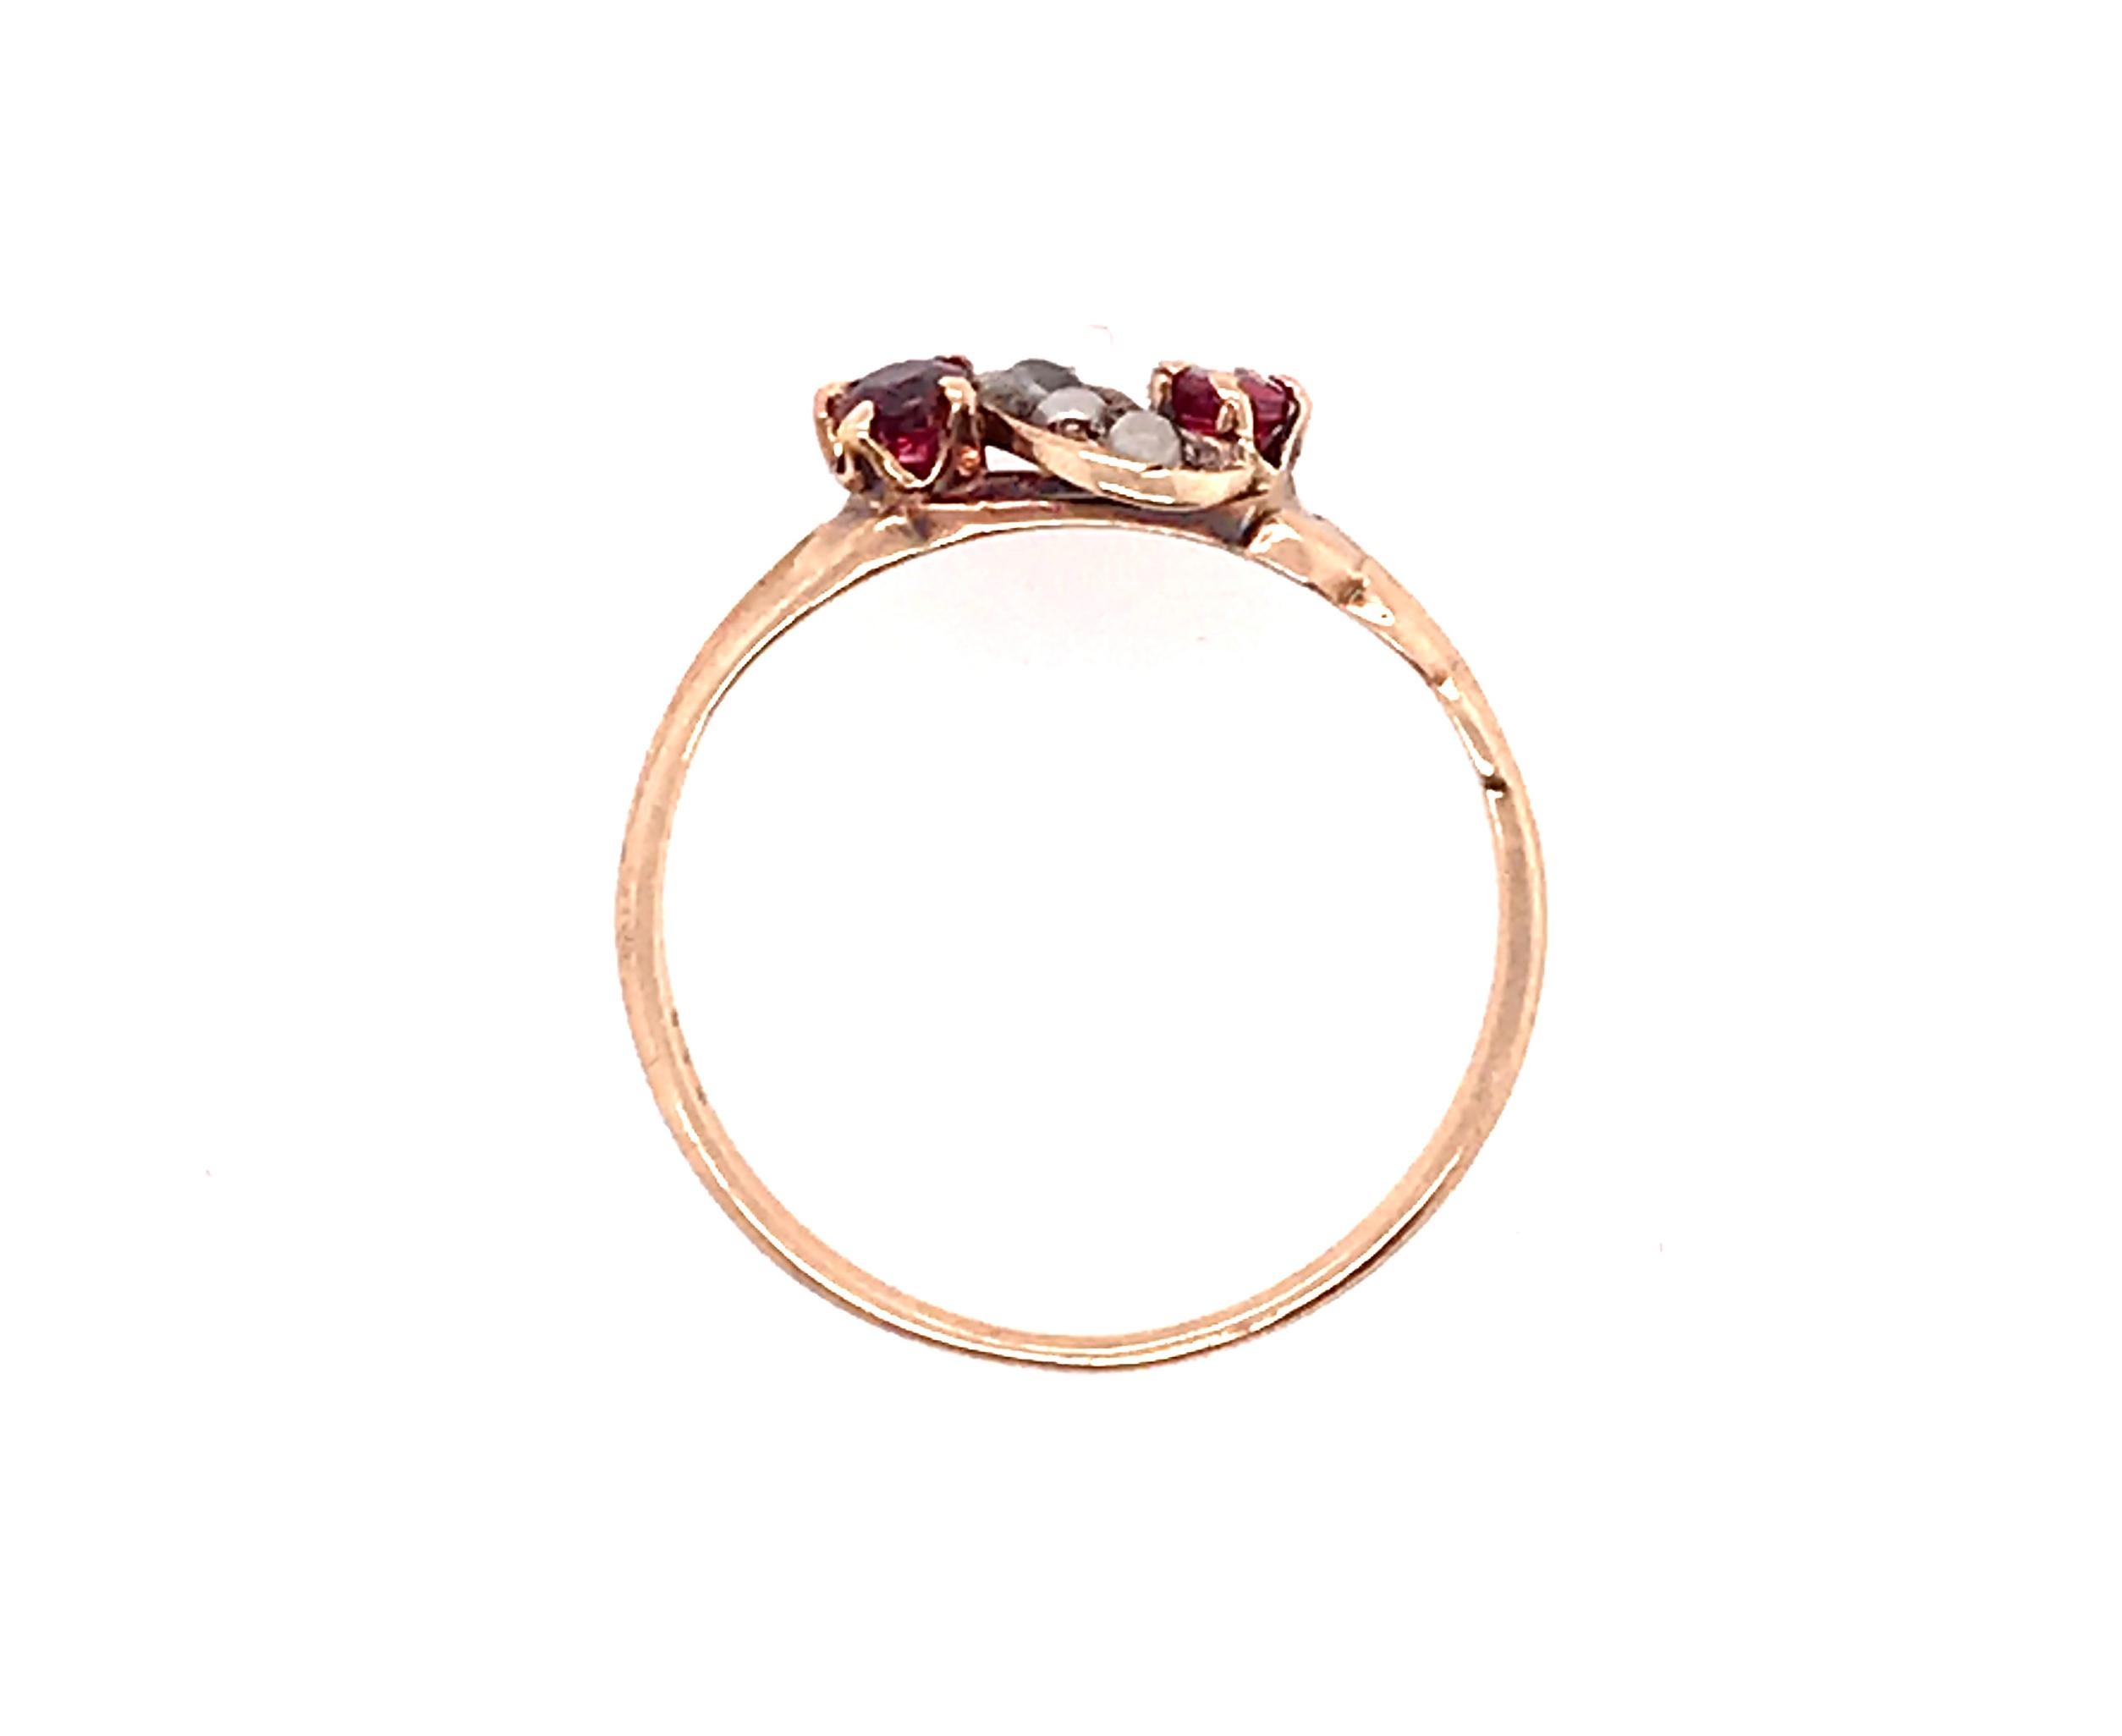 Genuine Original Art Deco Antique from 1940's Ruby Seed Pearl Cocktail Ring .25ct  Yellow Gold


Features Six Genuine Natural Round Cut Ruby Gemstones Totaling .25ct

Genuine Seed Pearls Accent Nicely 

Ruby is The Birthstone for July

Trademarked